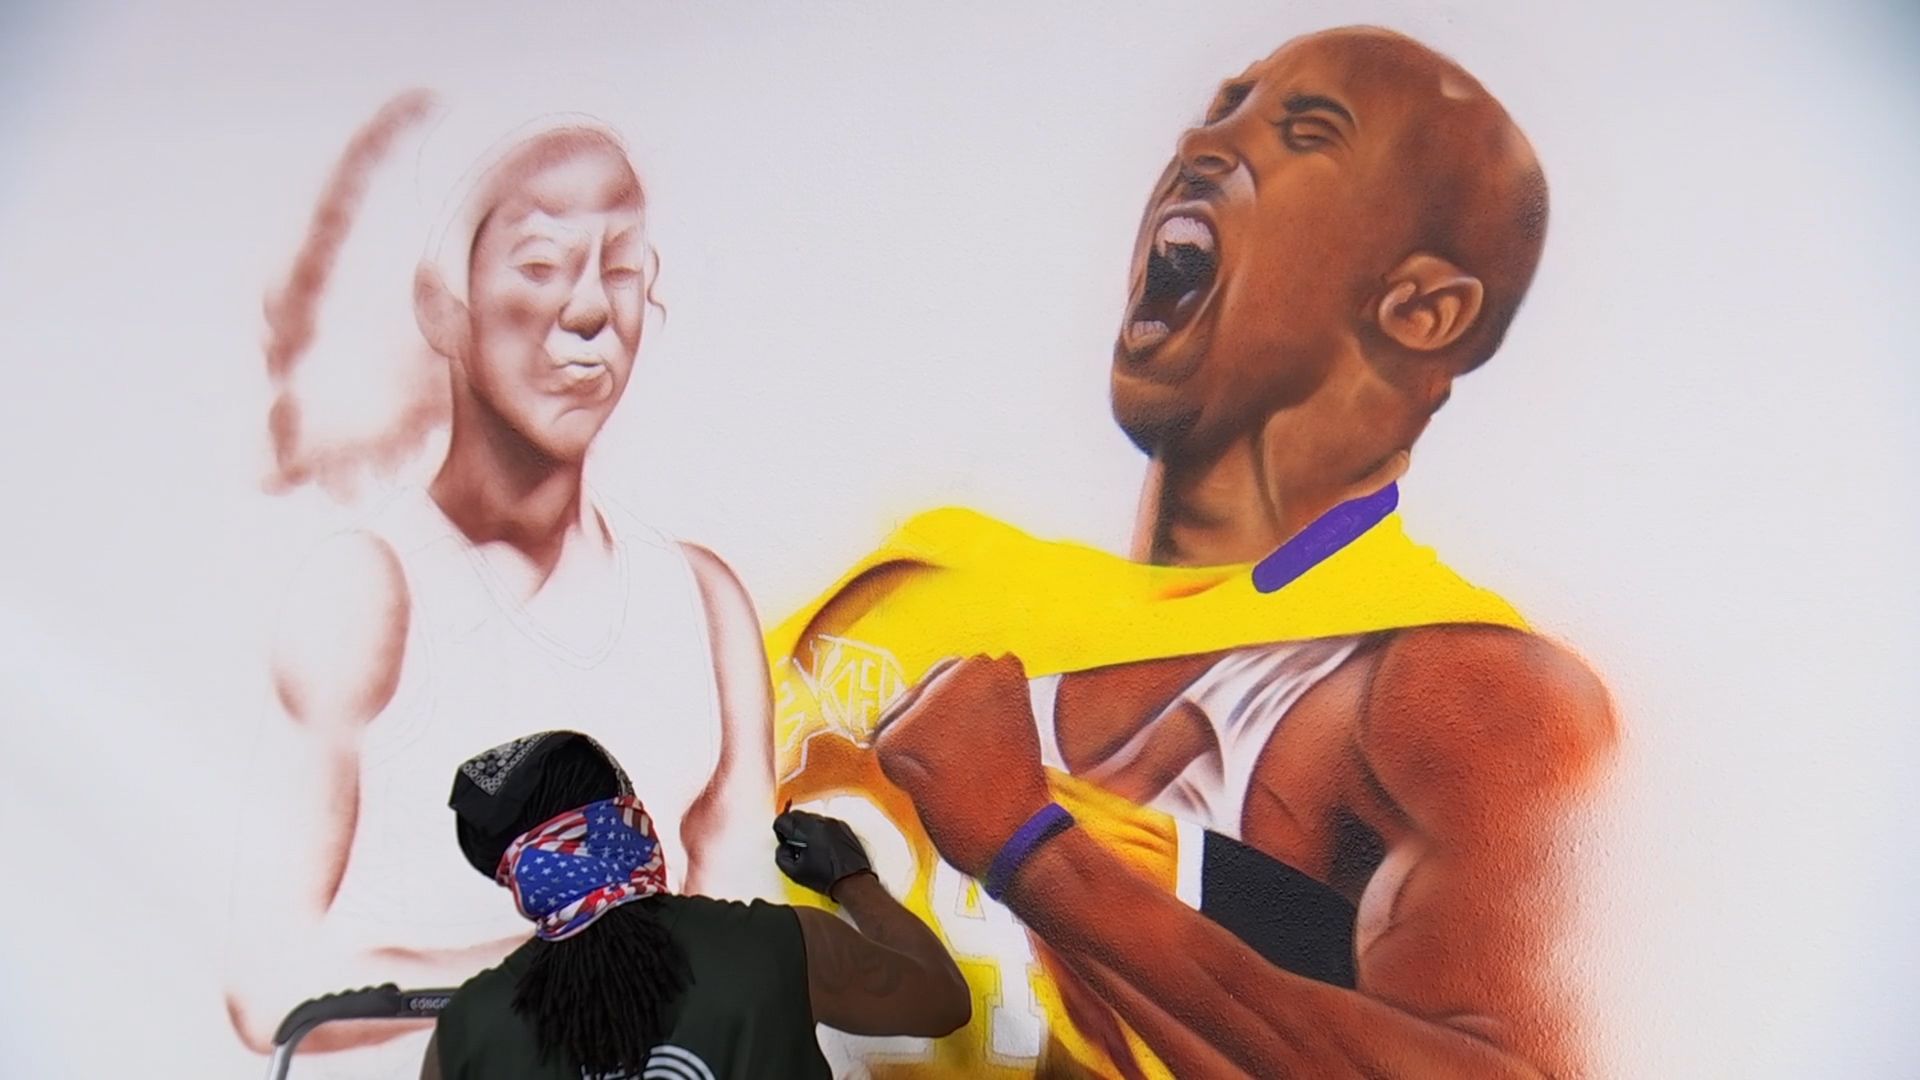 Local Mural Artist Pays Tribute to Kobe Bryant and Daughter